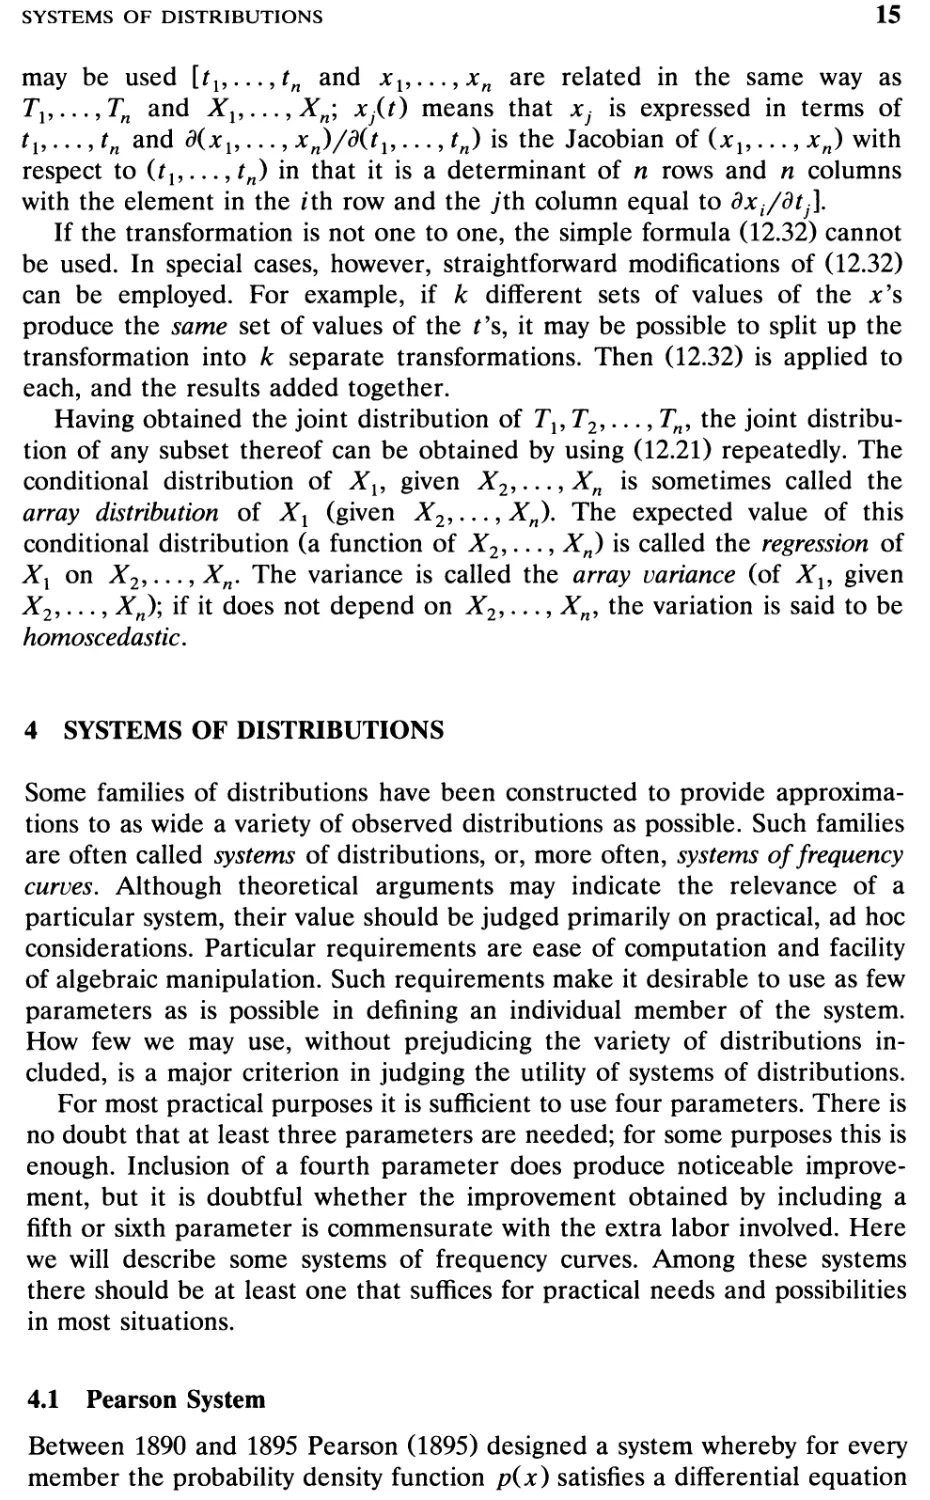 4 Systems of Distributions, 15